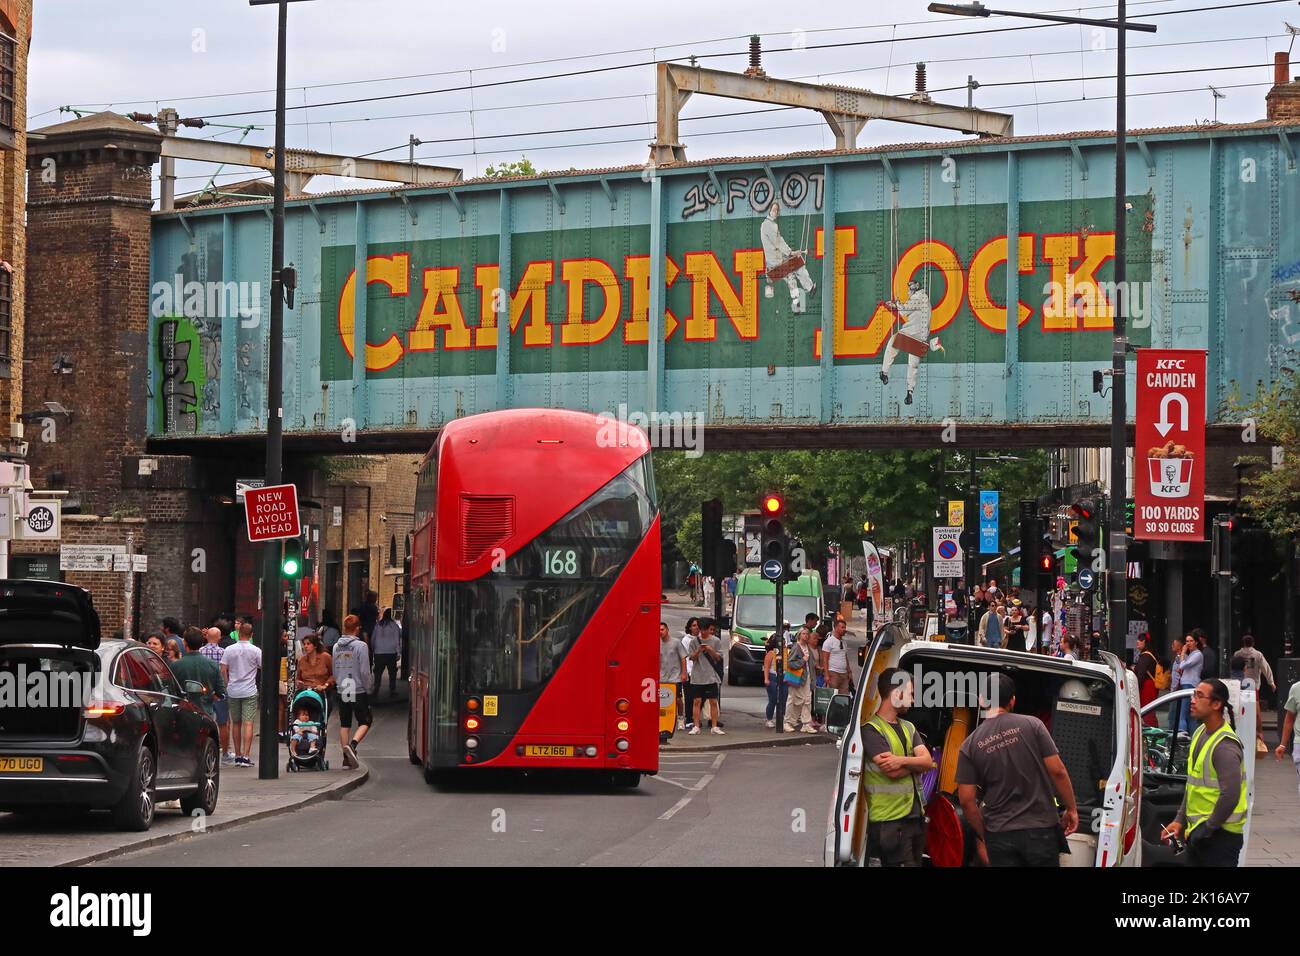 Famous Camden Lock railway bridge, busy with visitors, with red London Routemaster bus no 168, Camden Town, London,England, NW1 8AF Stock Photo